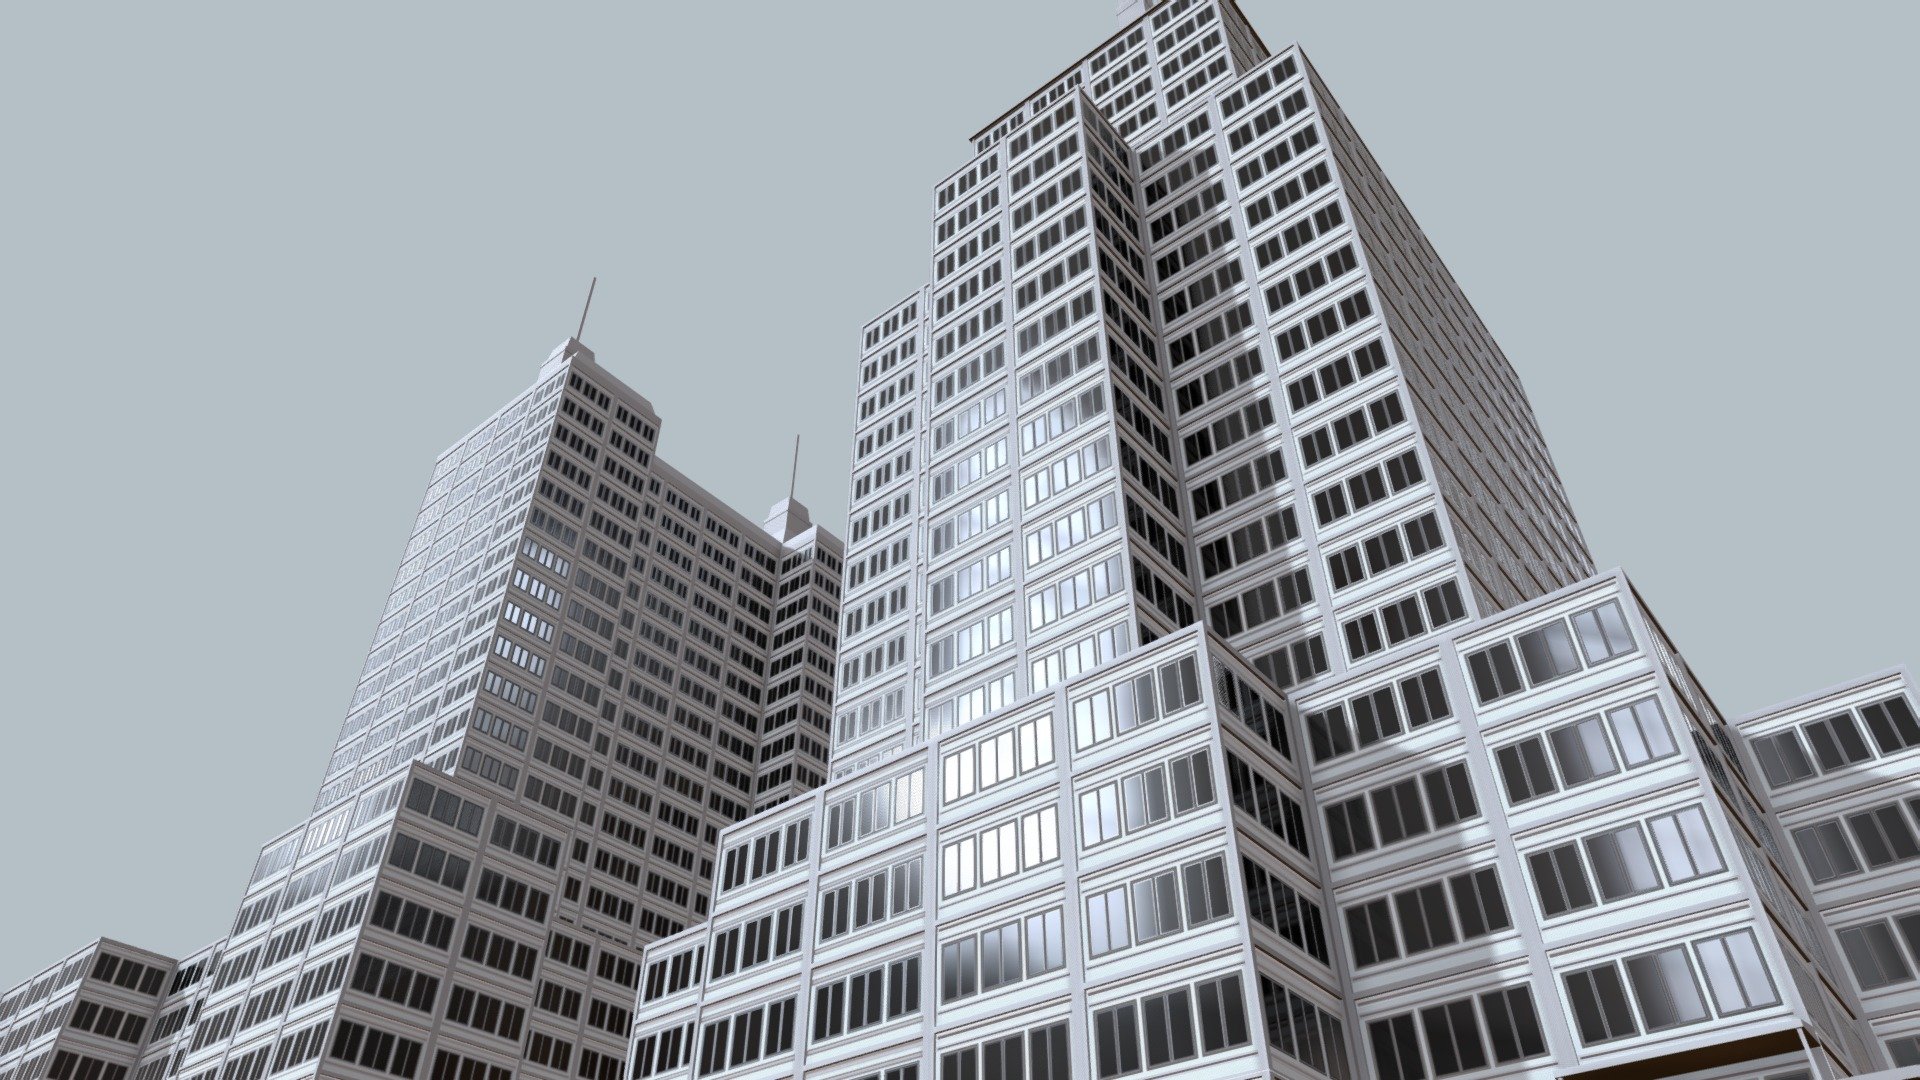 Office or Apartment Building - Office or Apartment Building - Buy Royalty Free 3D model by jimbogies 3d model